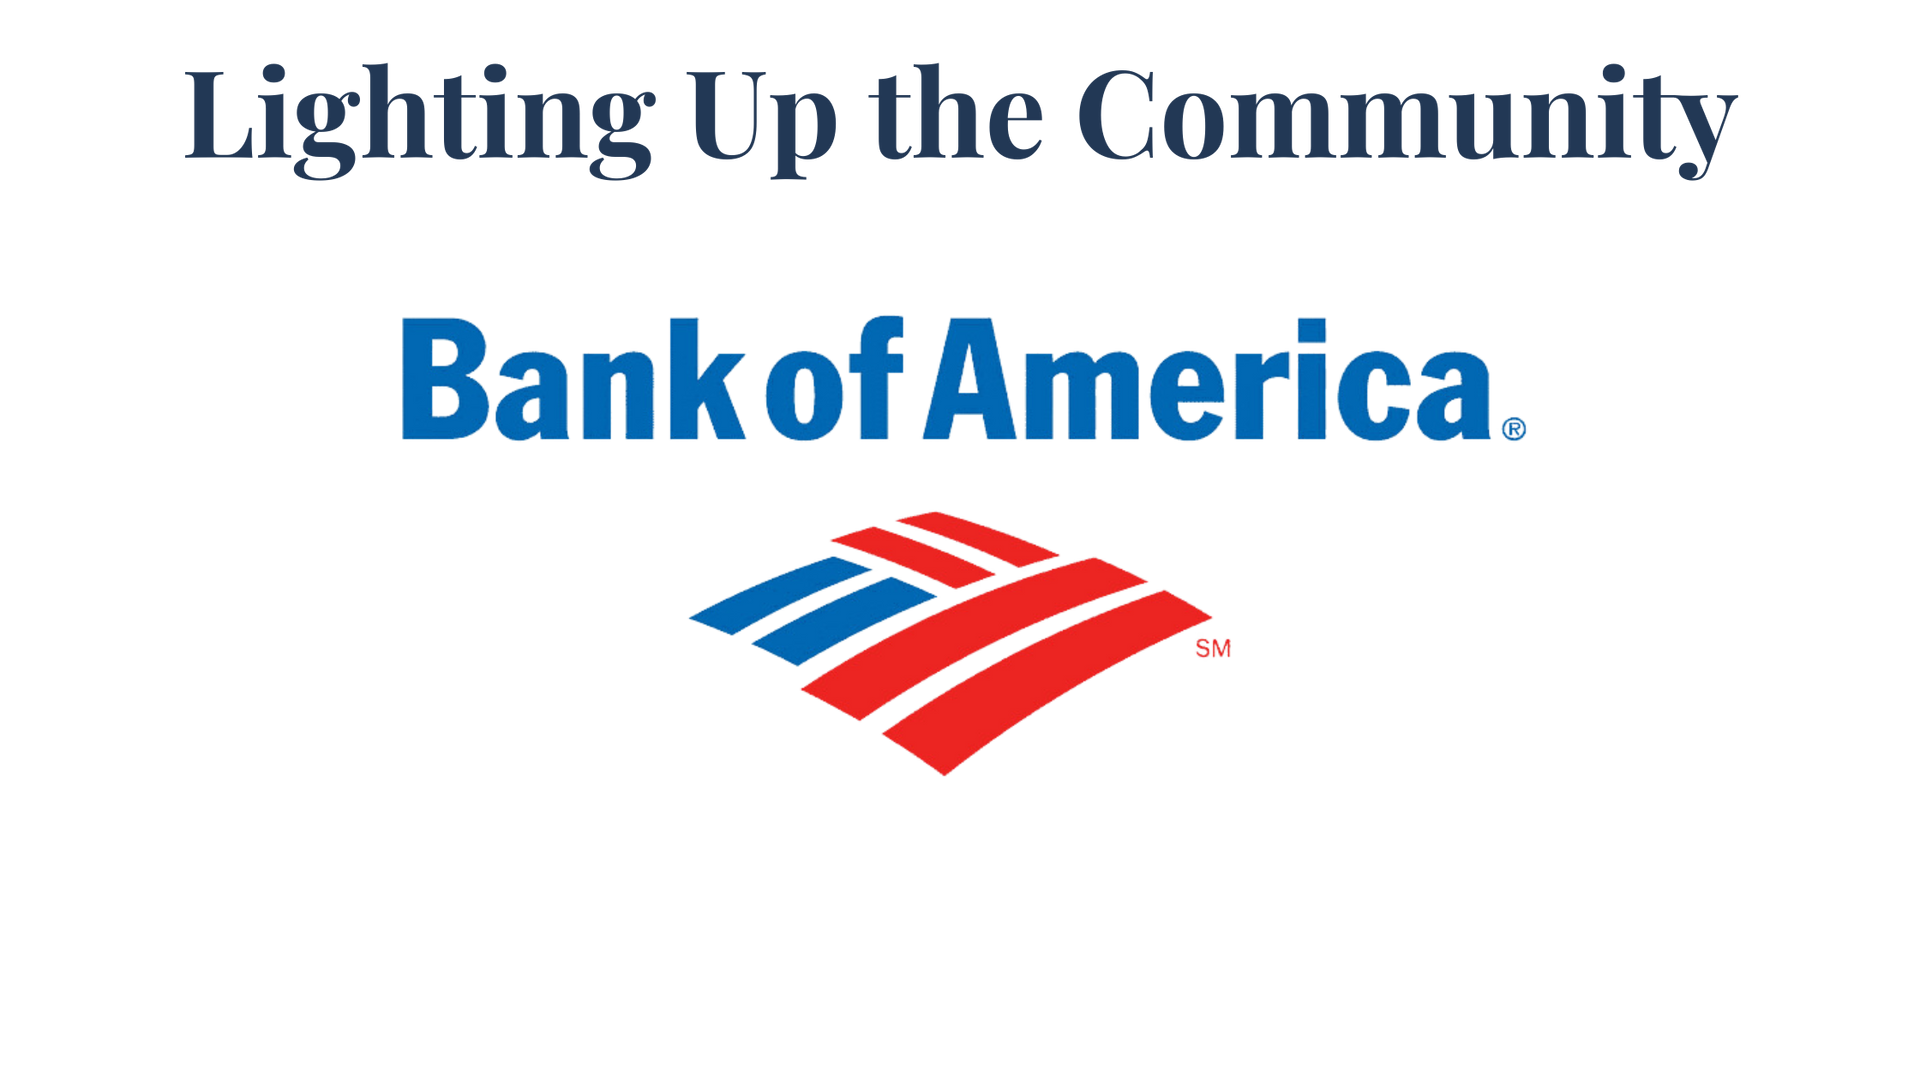 The bank of america logo is on a white background.